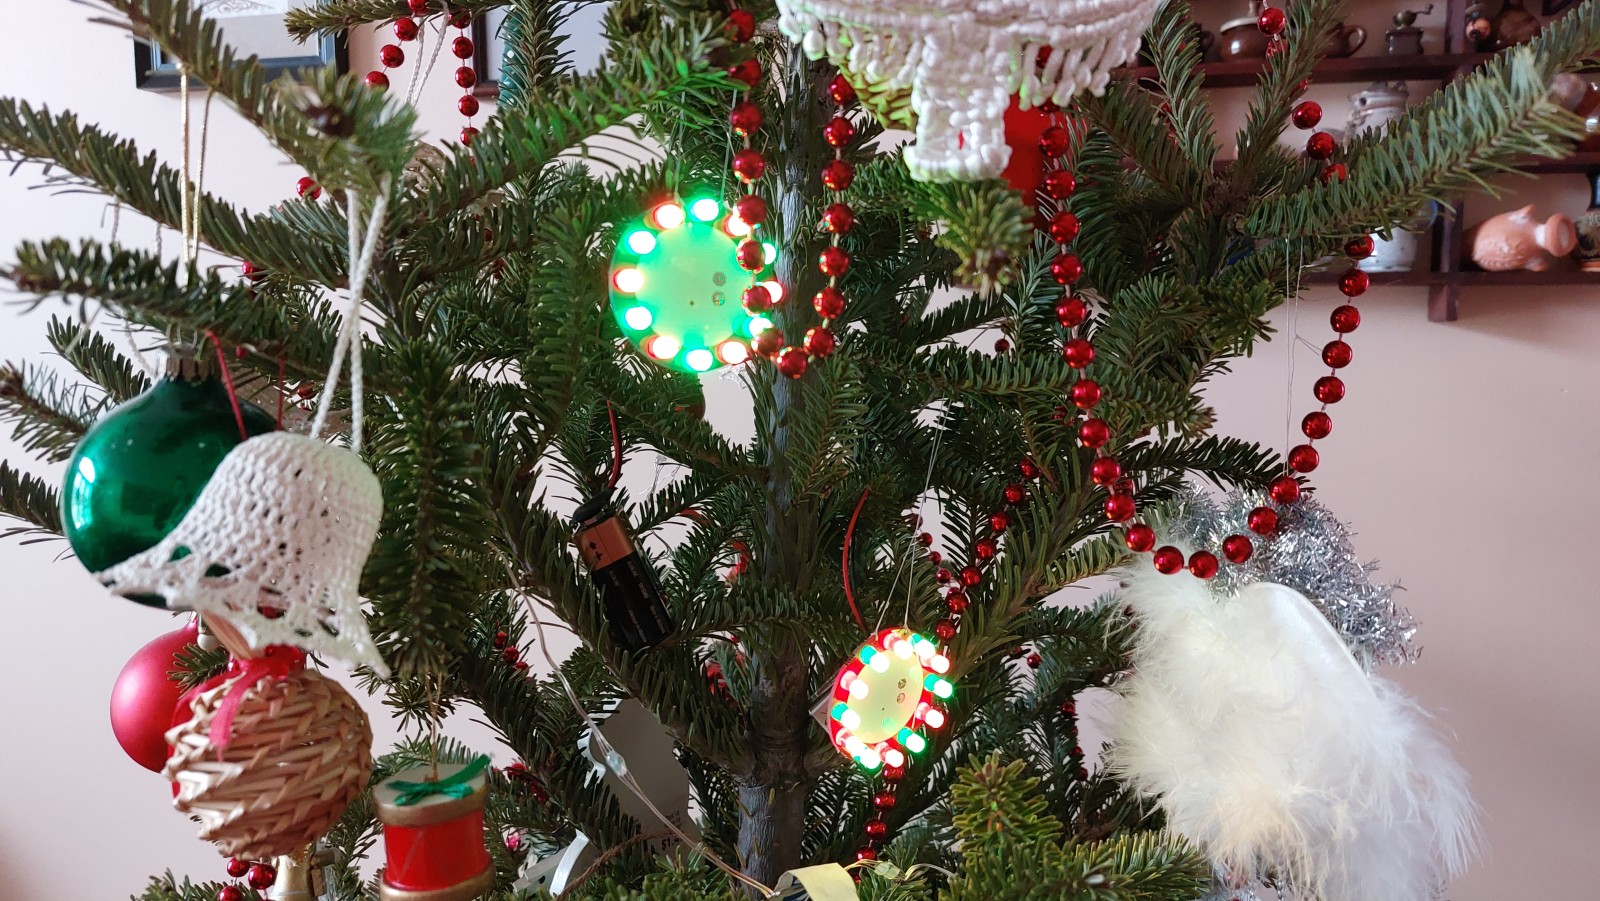 Ornaments in a tree, burning bright and killing 9V batteries.